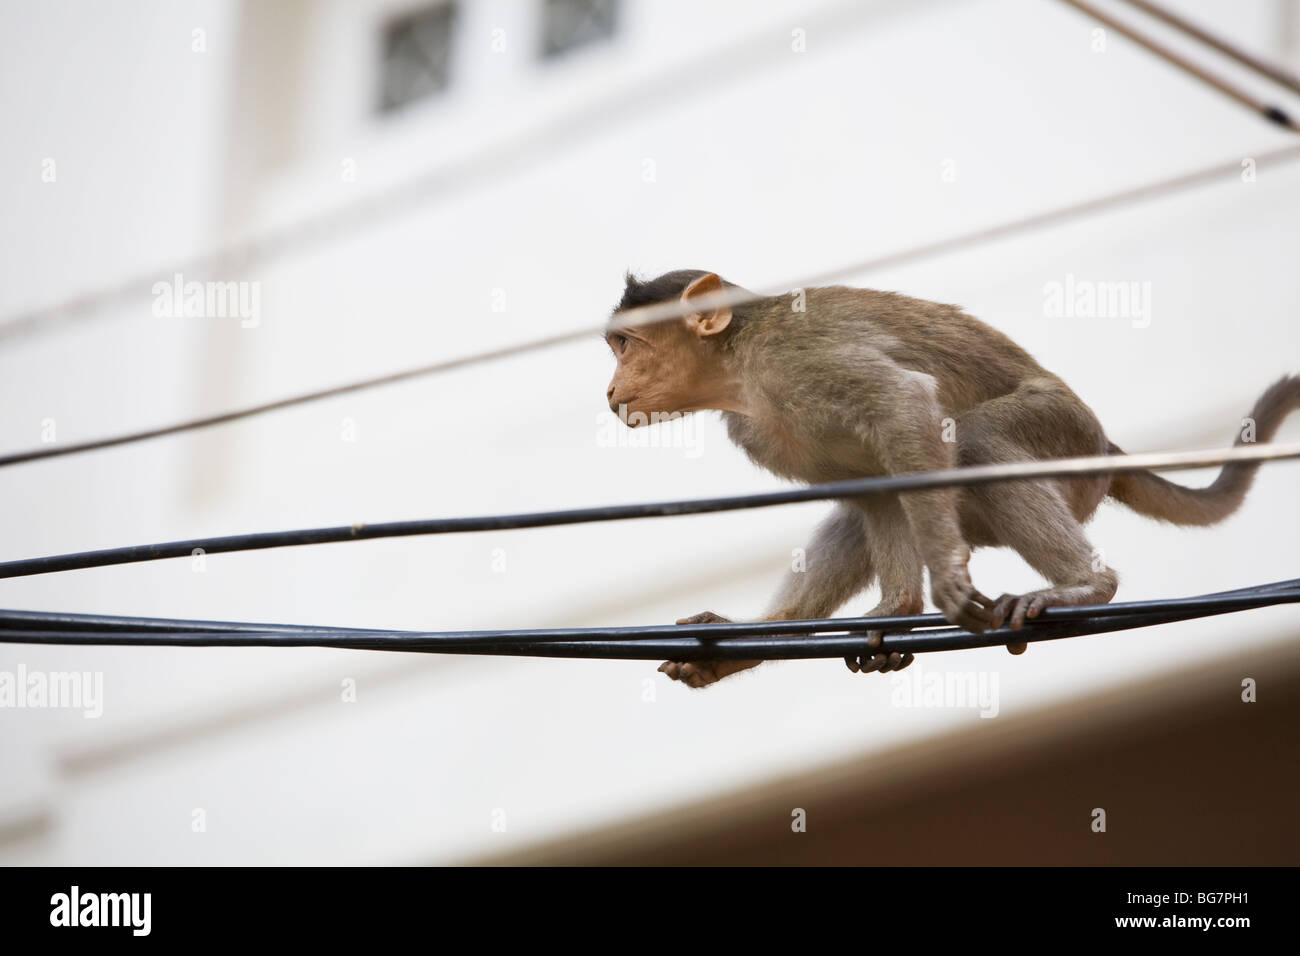 Bonnet Macaque monkey playing on power cables Stock Photo